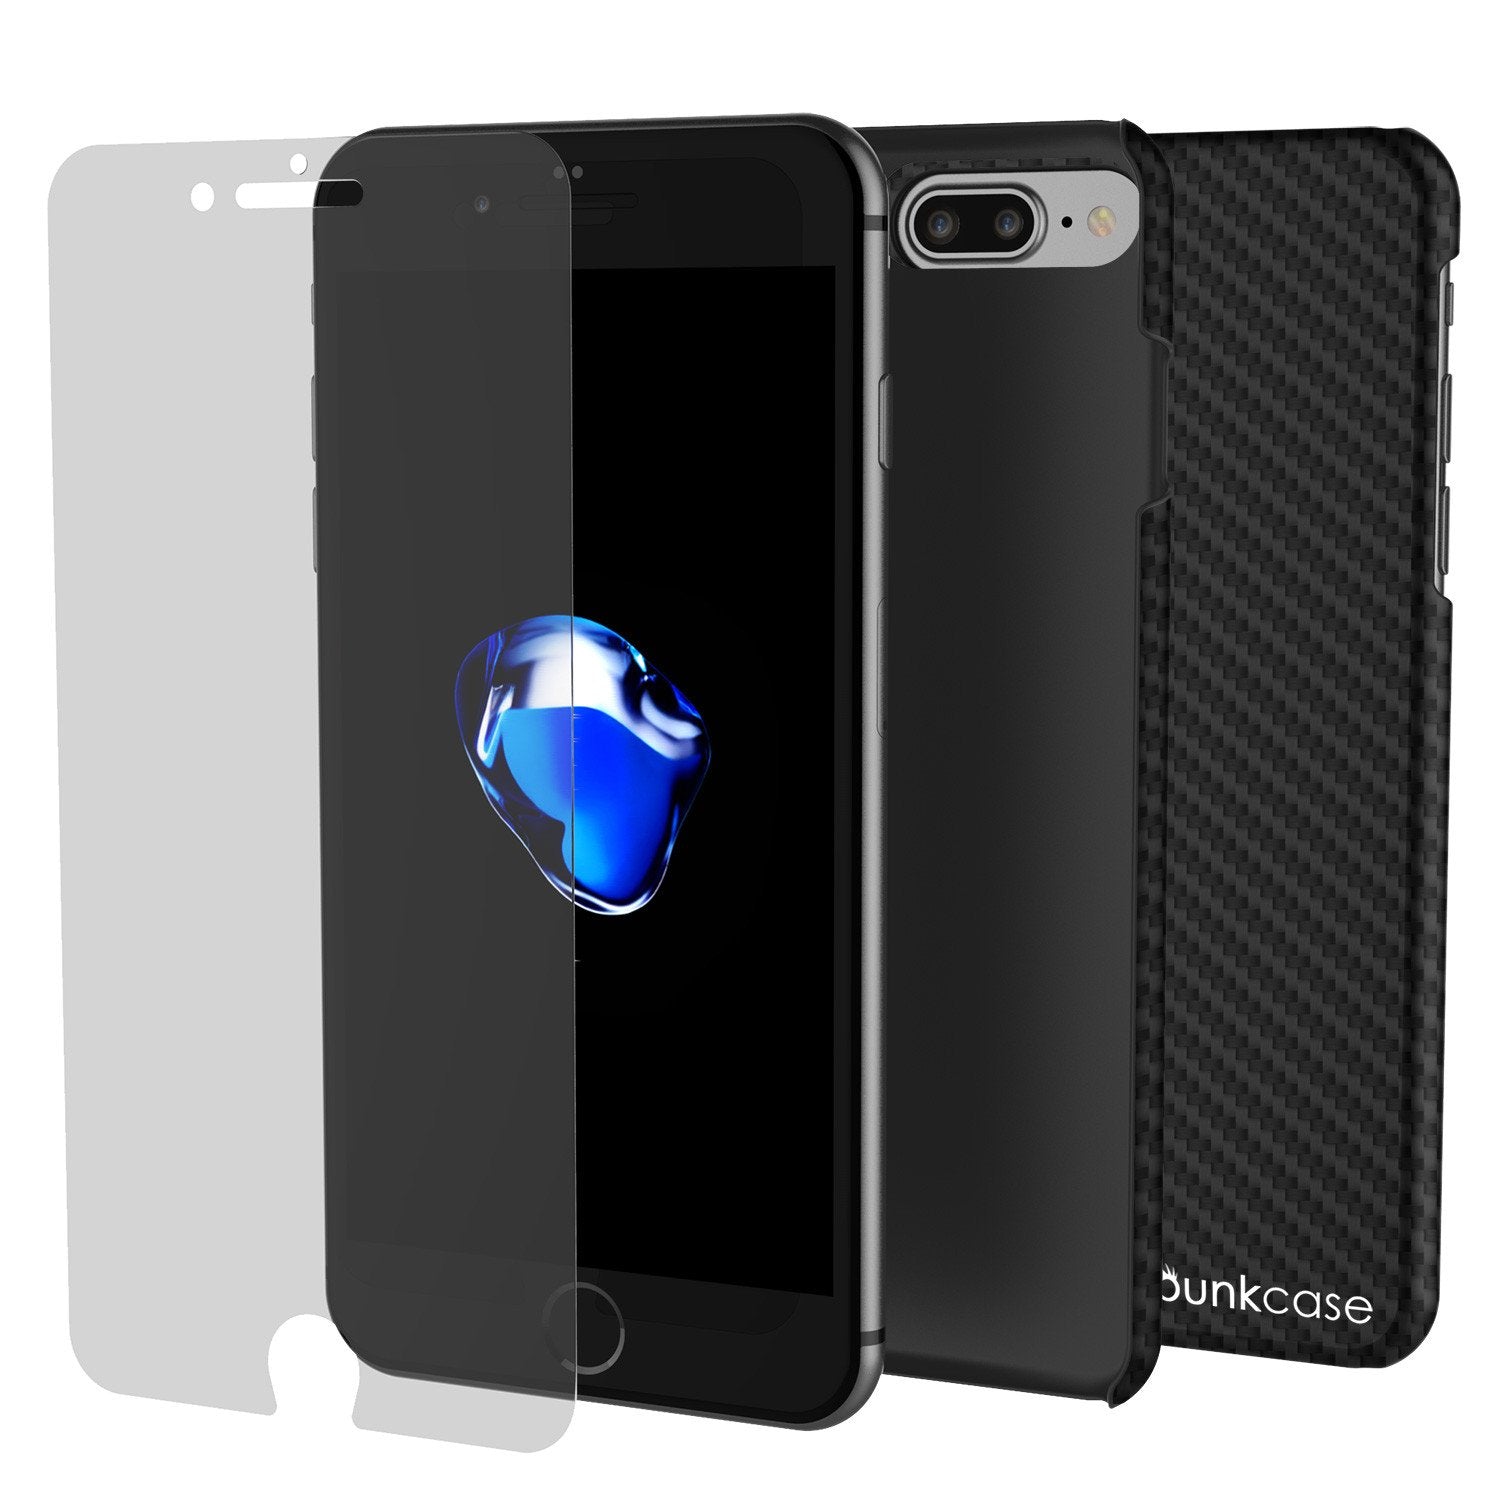 iPhone 7+ Plus Case Punkcase Carbonshield Shockproof Ultrathin Case Cover